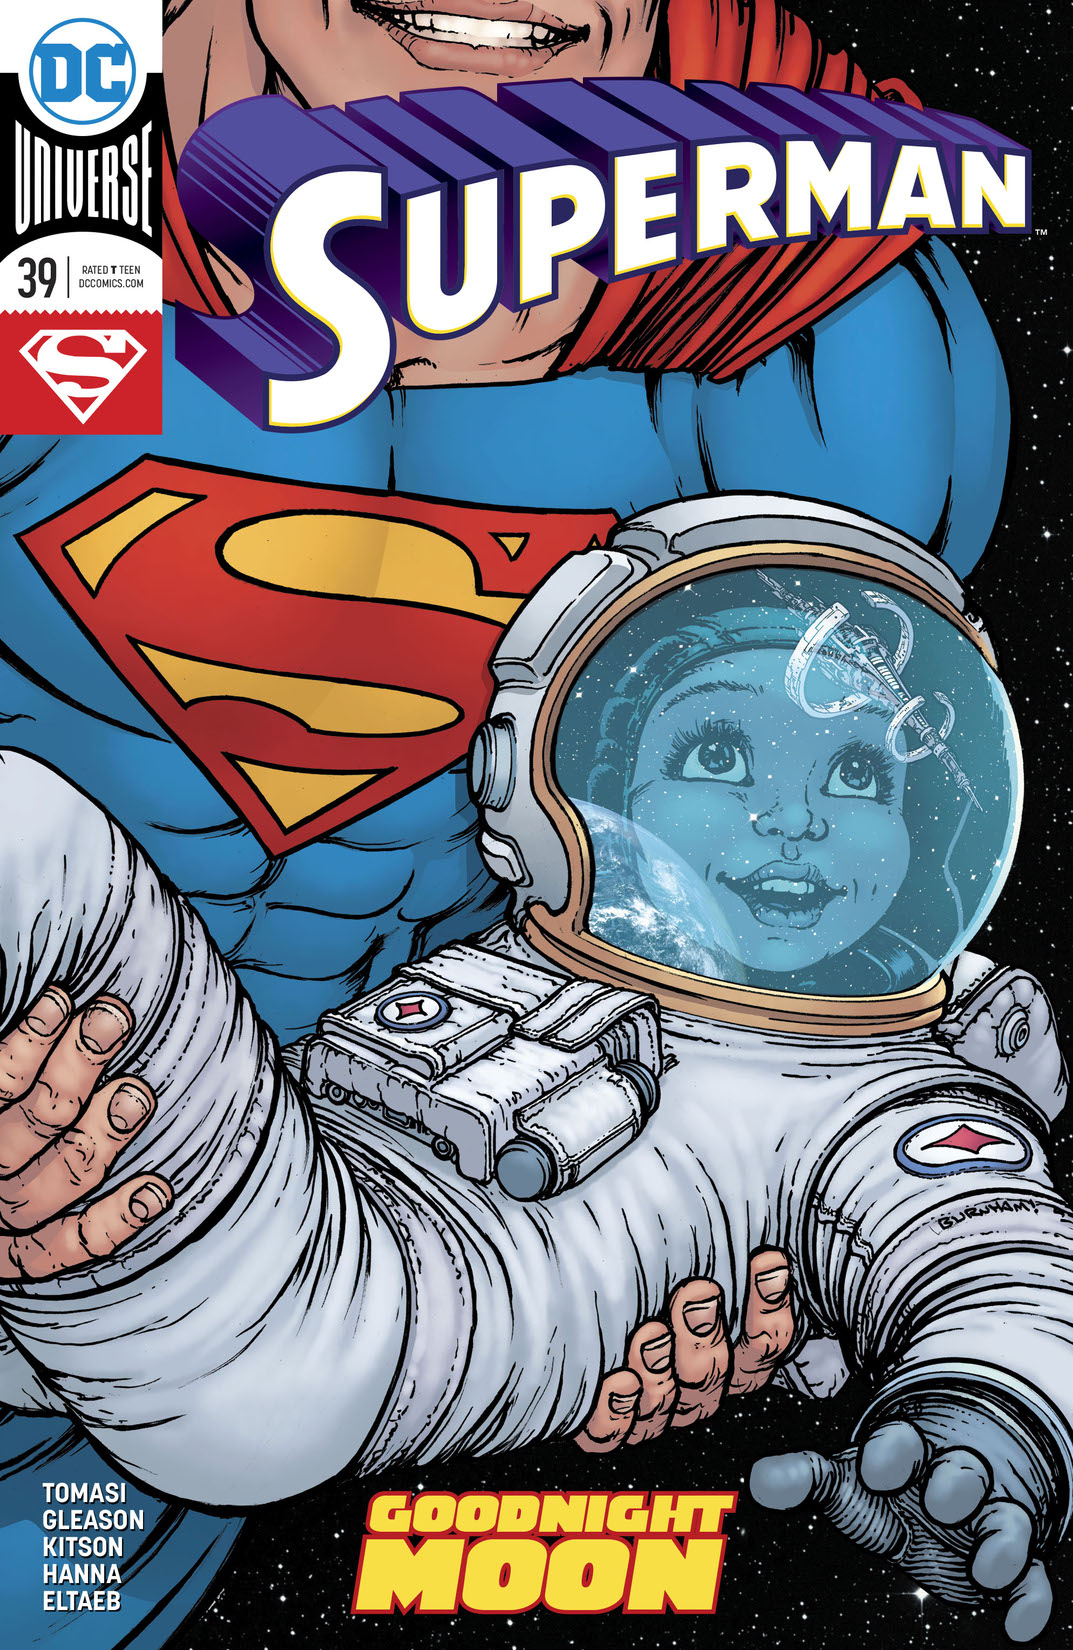 Superman (2016-) #39 preview images